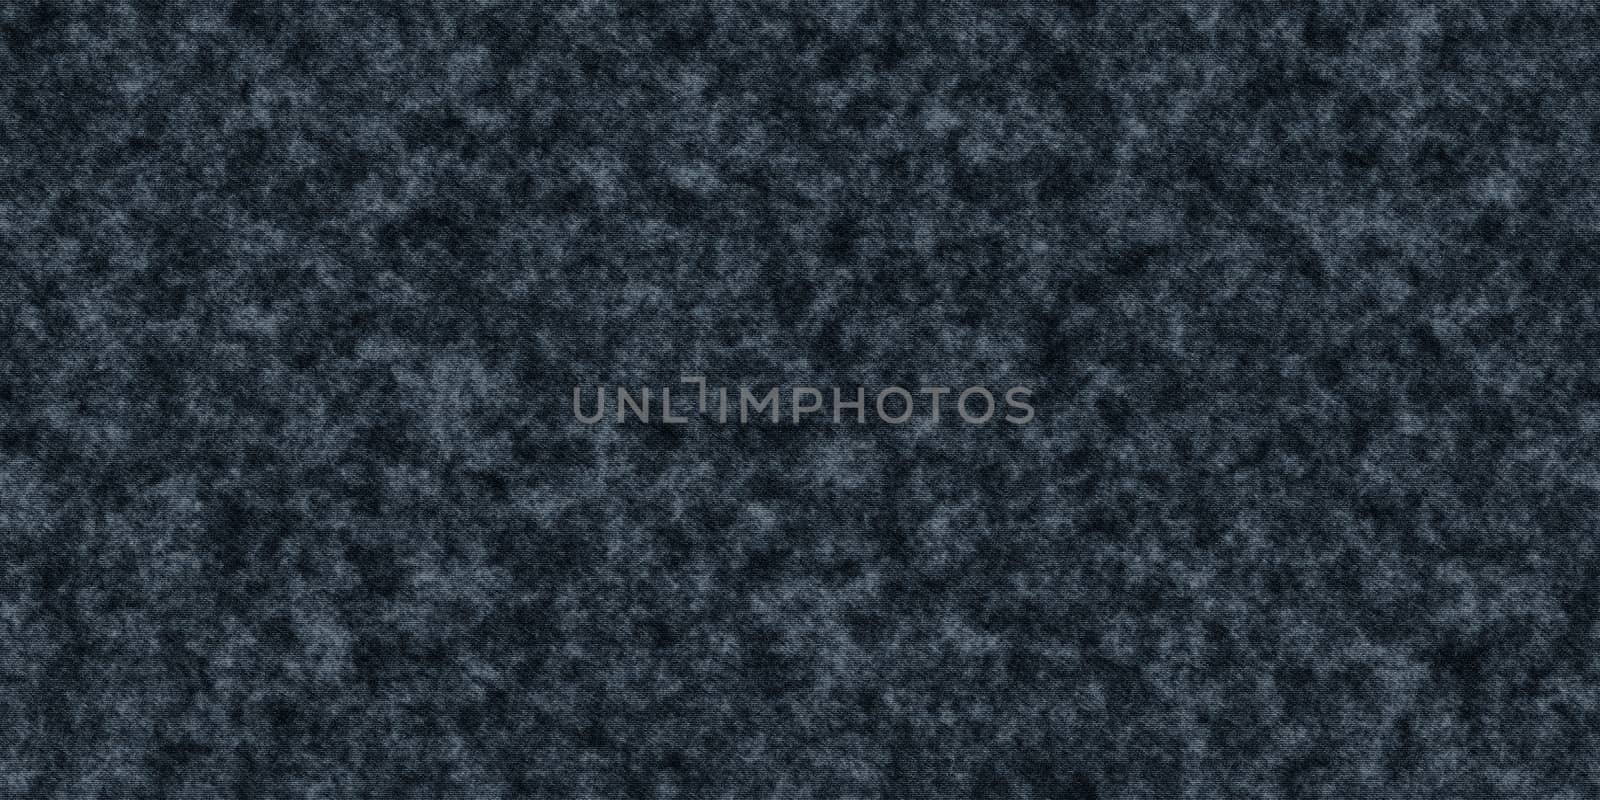 Dirty Blue Jeans Denim Seamless Textures. Textile Fabric Background. Jeans Clothing Material Surface. Grunge Wear Pattern. by sanches812